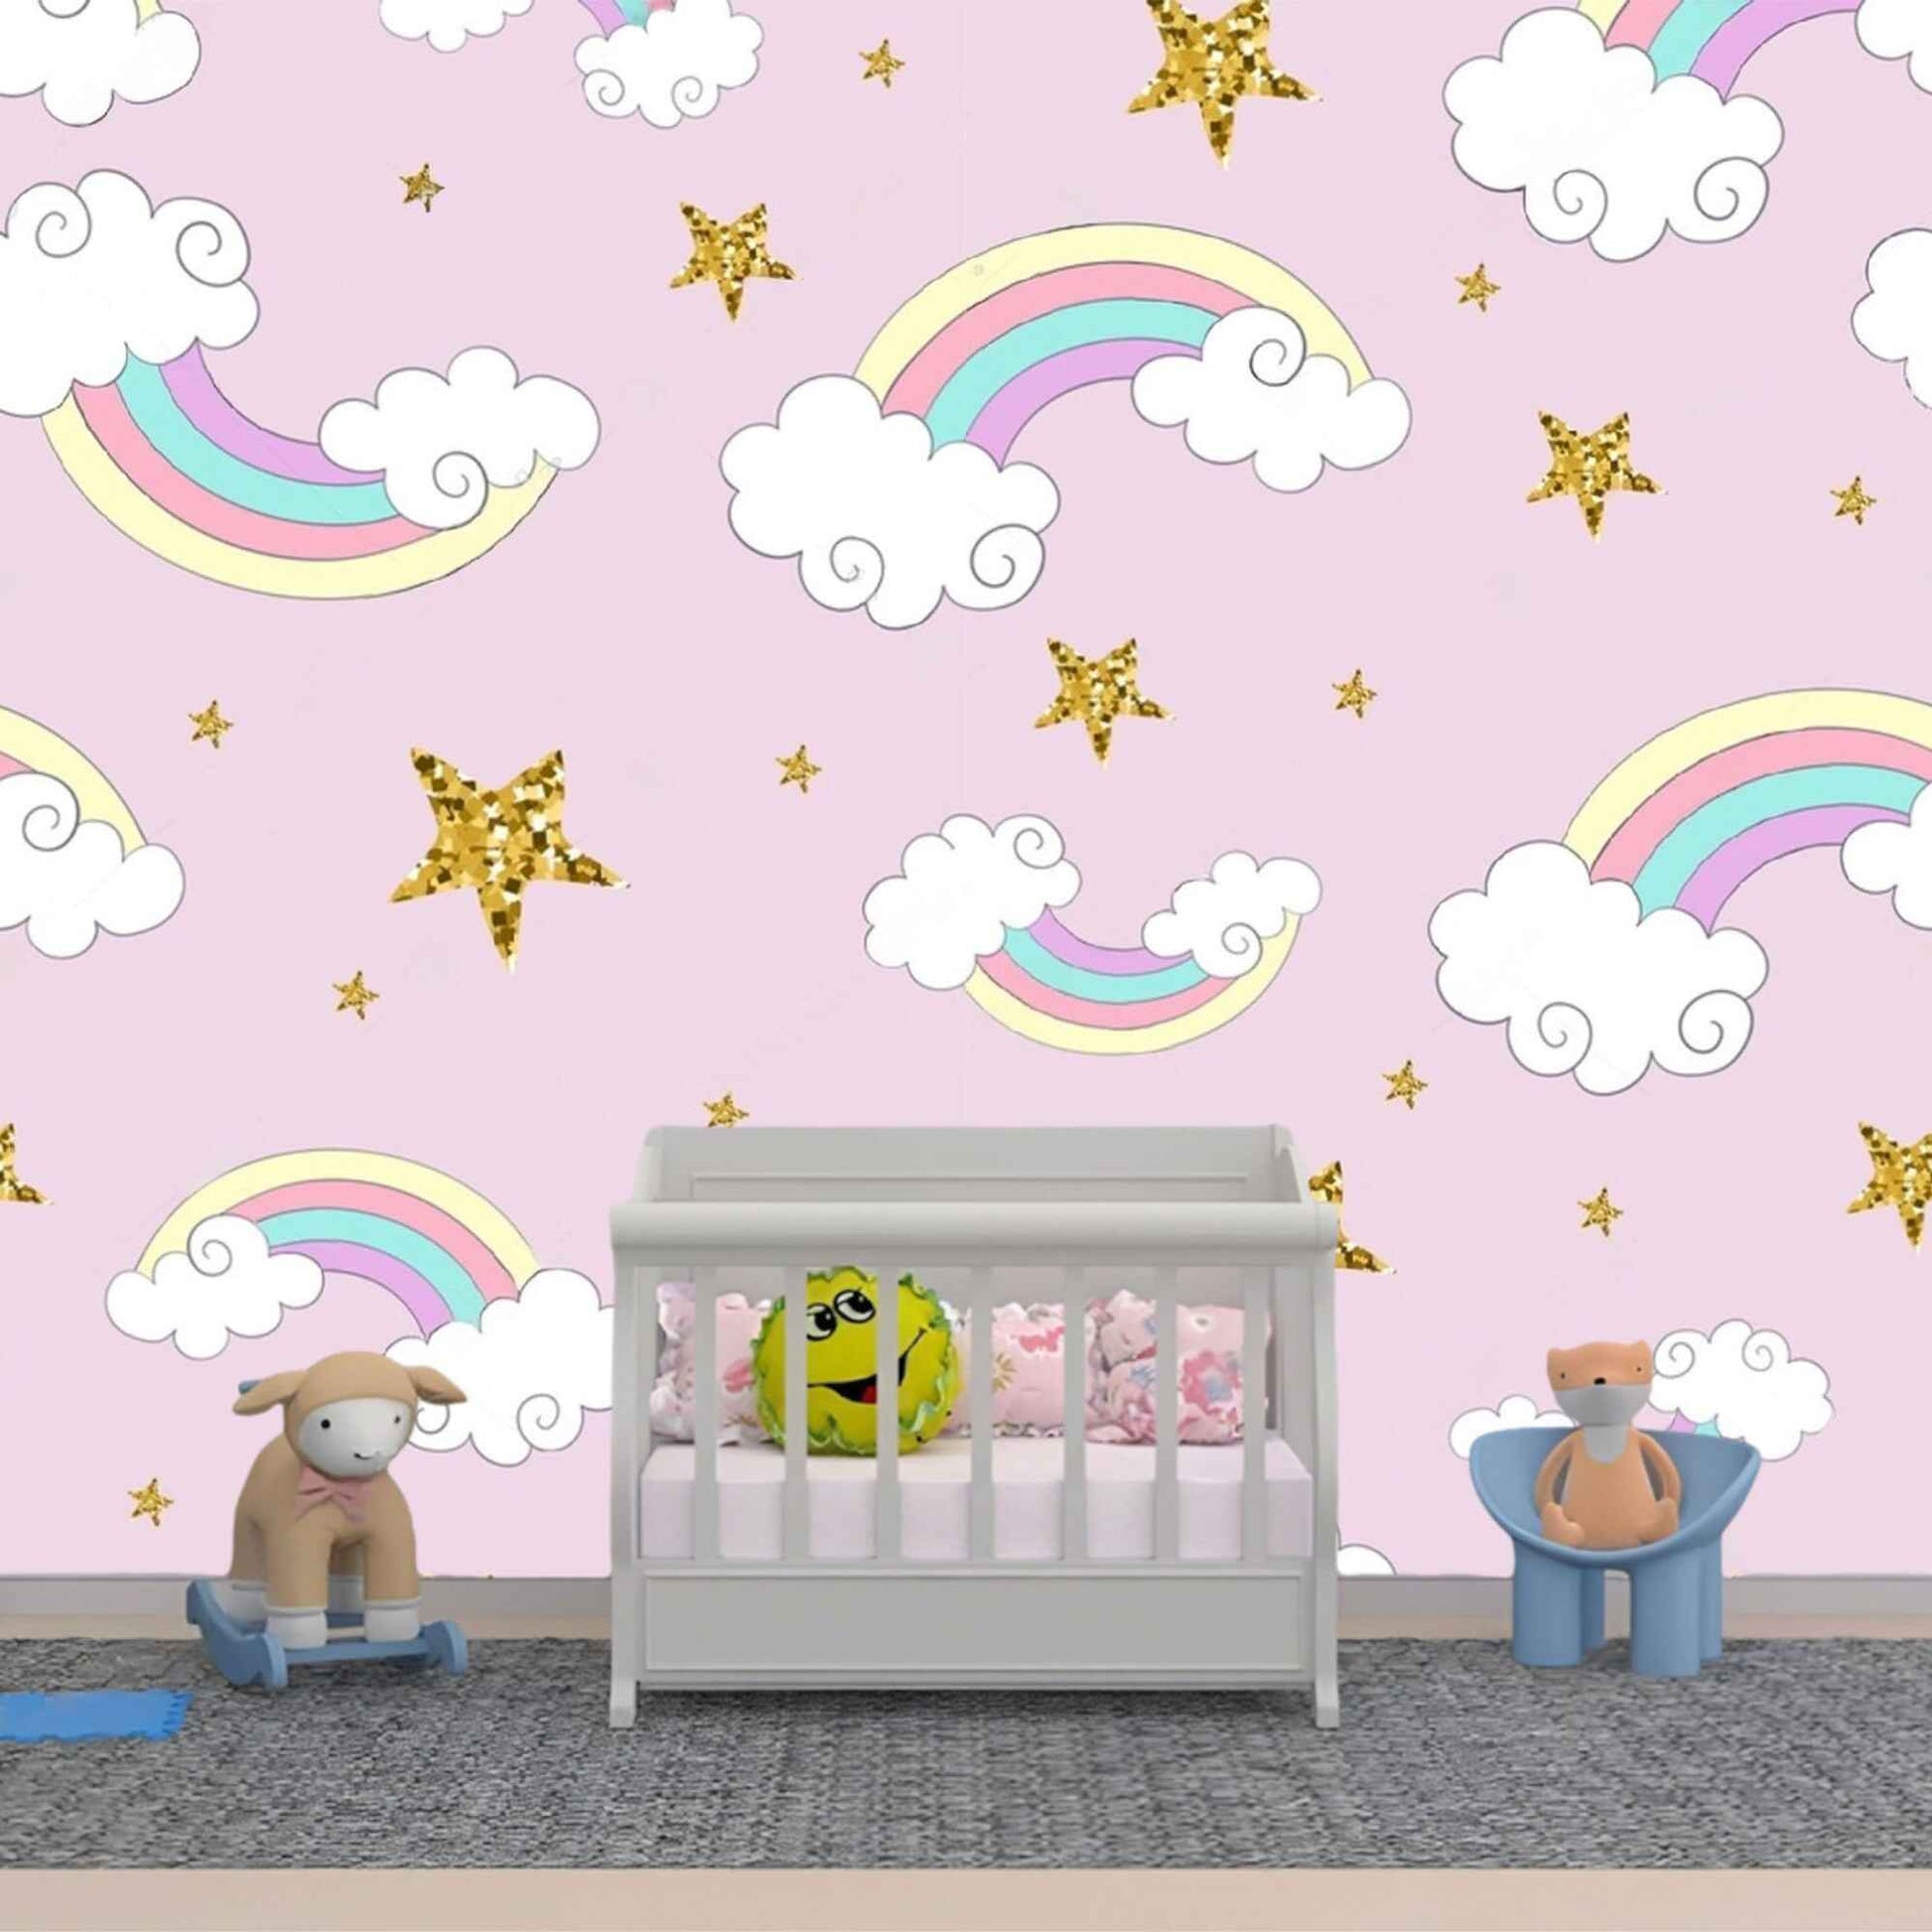 Colorful rainbow wallpaper in a baby girl's nursery, adding a playful and enchanting atmosphere.